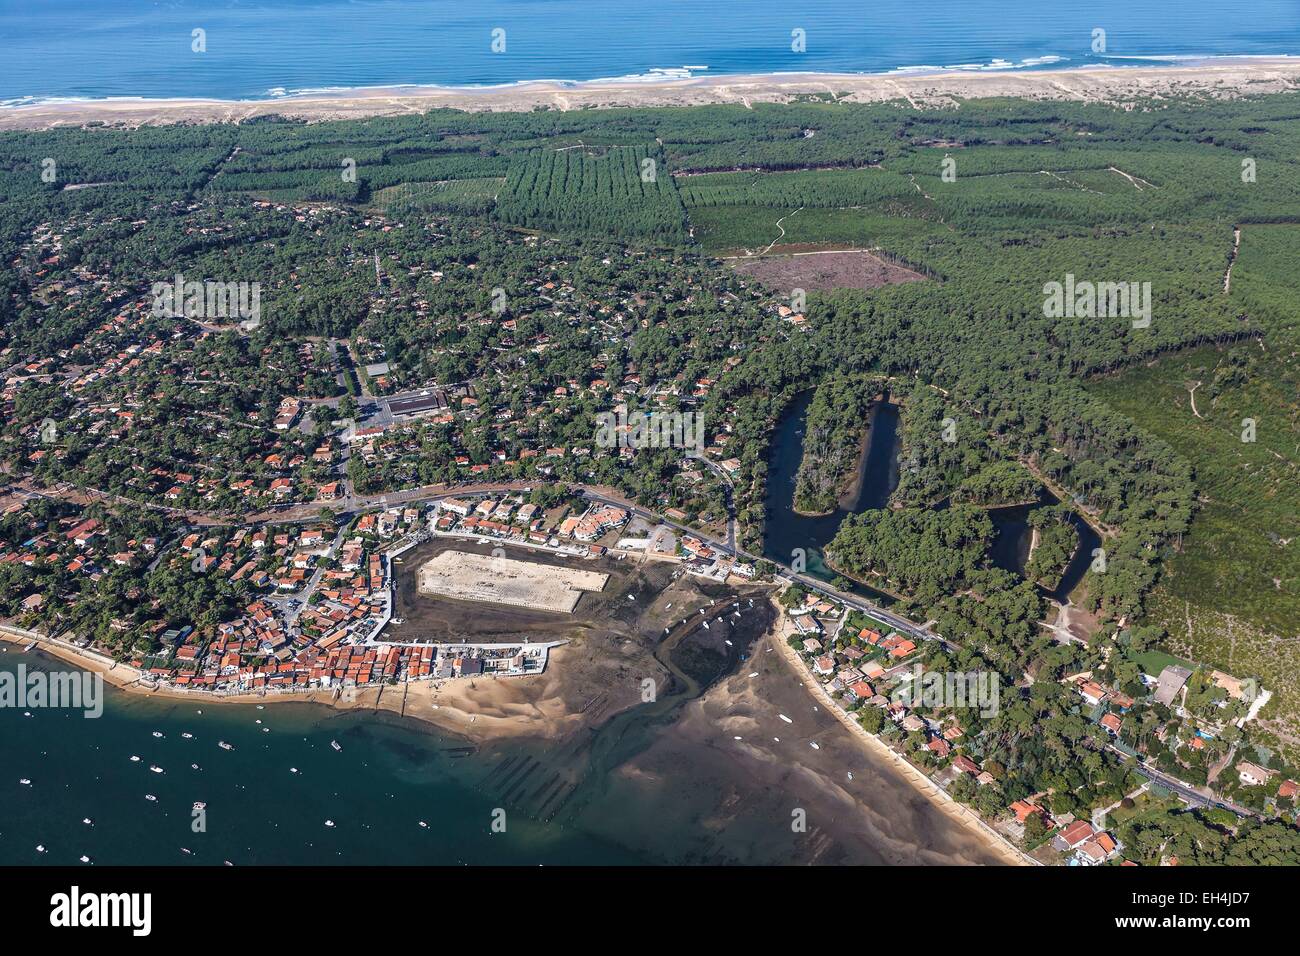 France, Gironde, Lege Cap Ferret, Piraillan, the seaside resort on the Bassin d'Arcachon and the pine forest (aerial view) Stock Photo